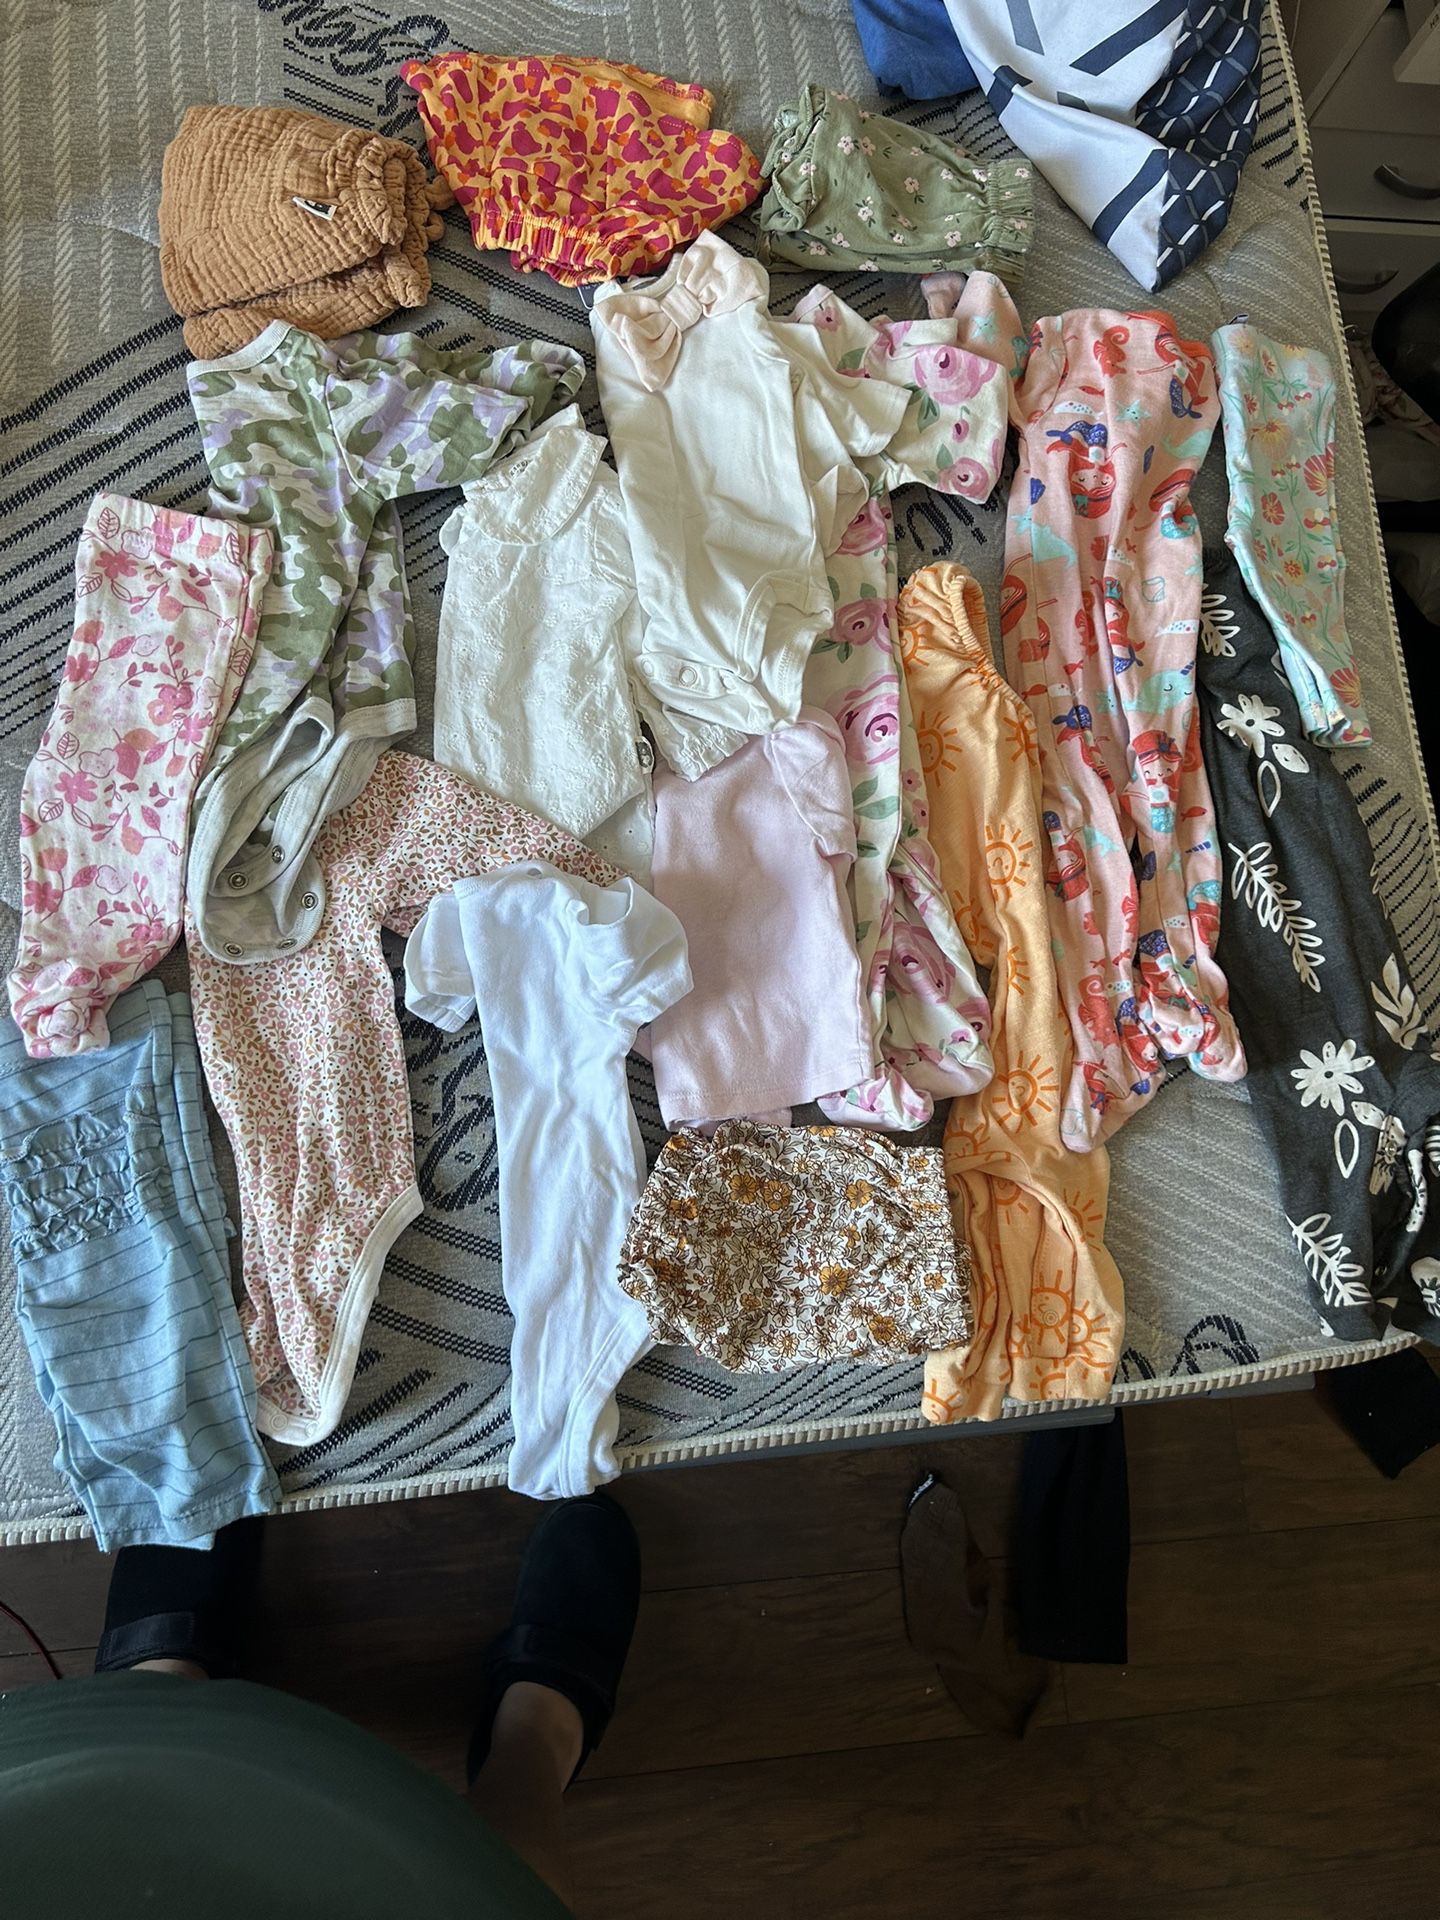 NEWBORN AND SOME 0-3 MONTHS CLOTHES